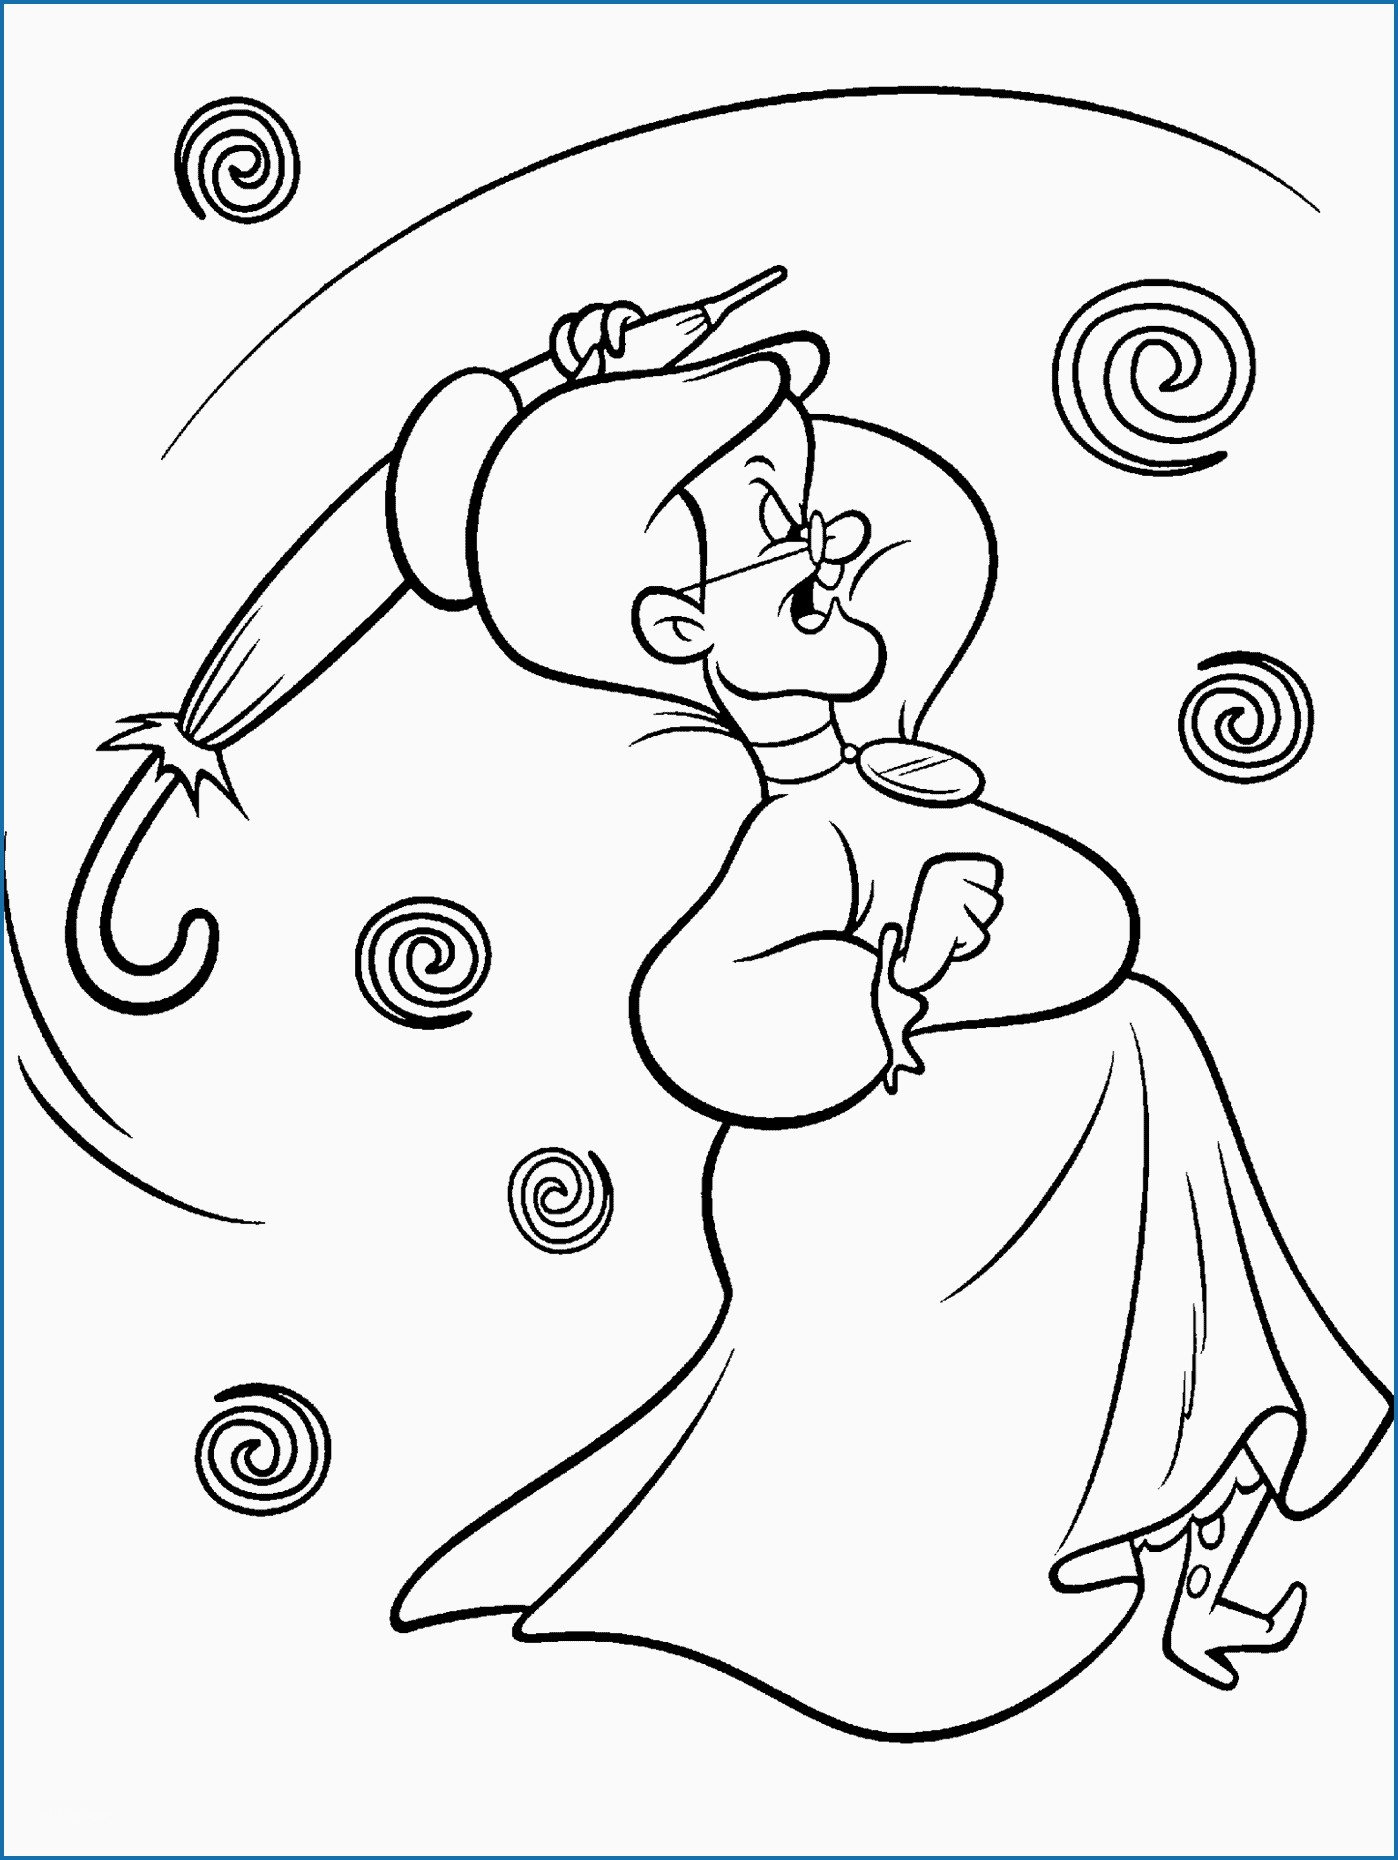 Elmer Fudd Coloring Pages Coloring Looney Tunes Coloring Book Pictures Of Cats To Print Ba